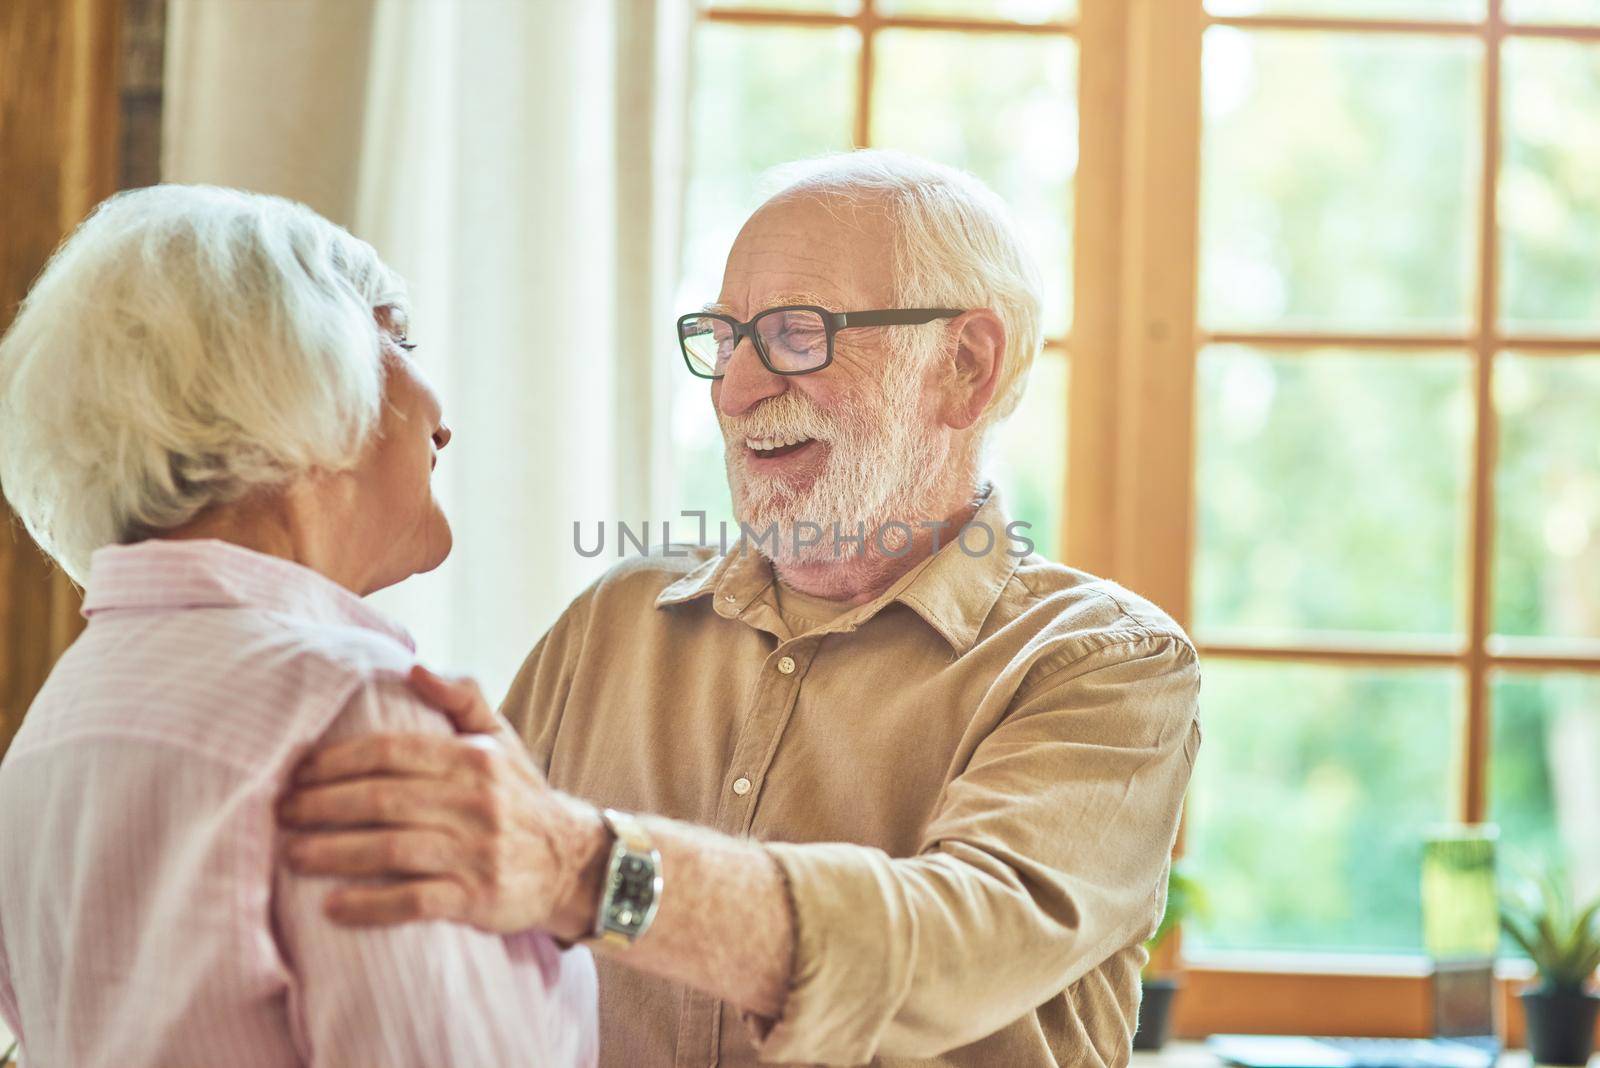 Smiling senior couple looking each other while standing near the window in their house. Family and relationships concept. Copy space